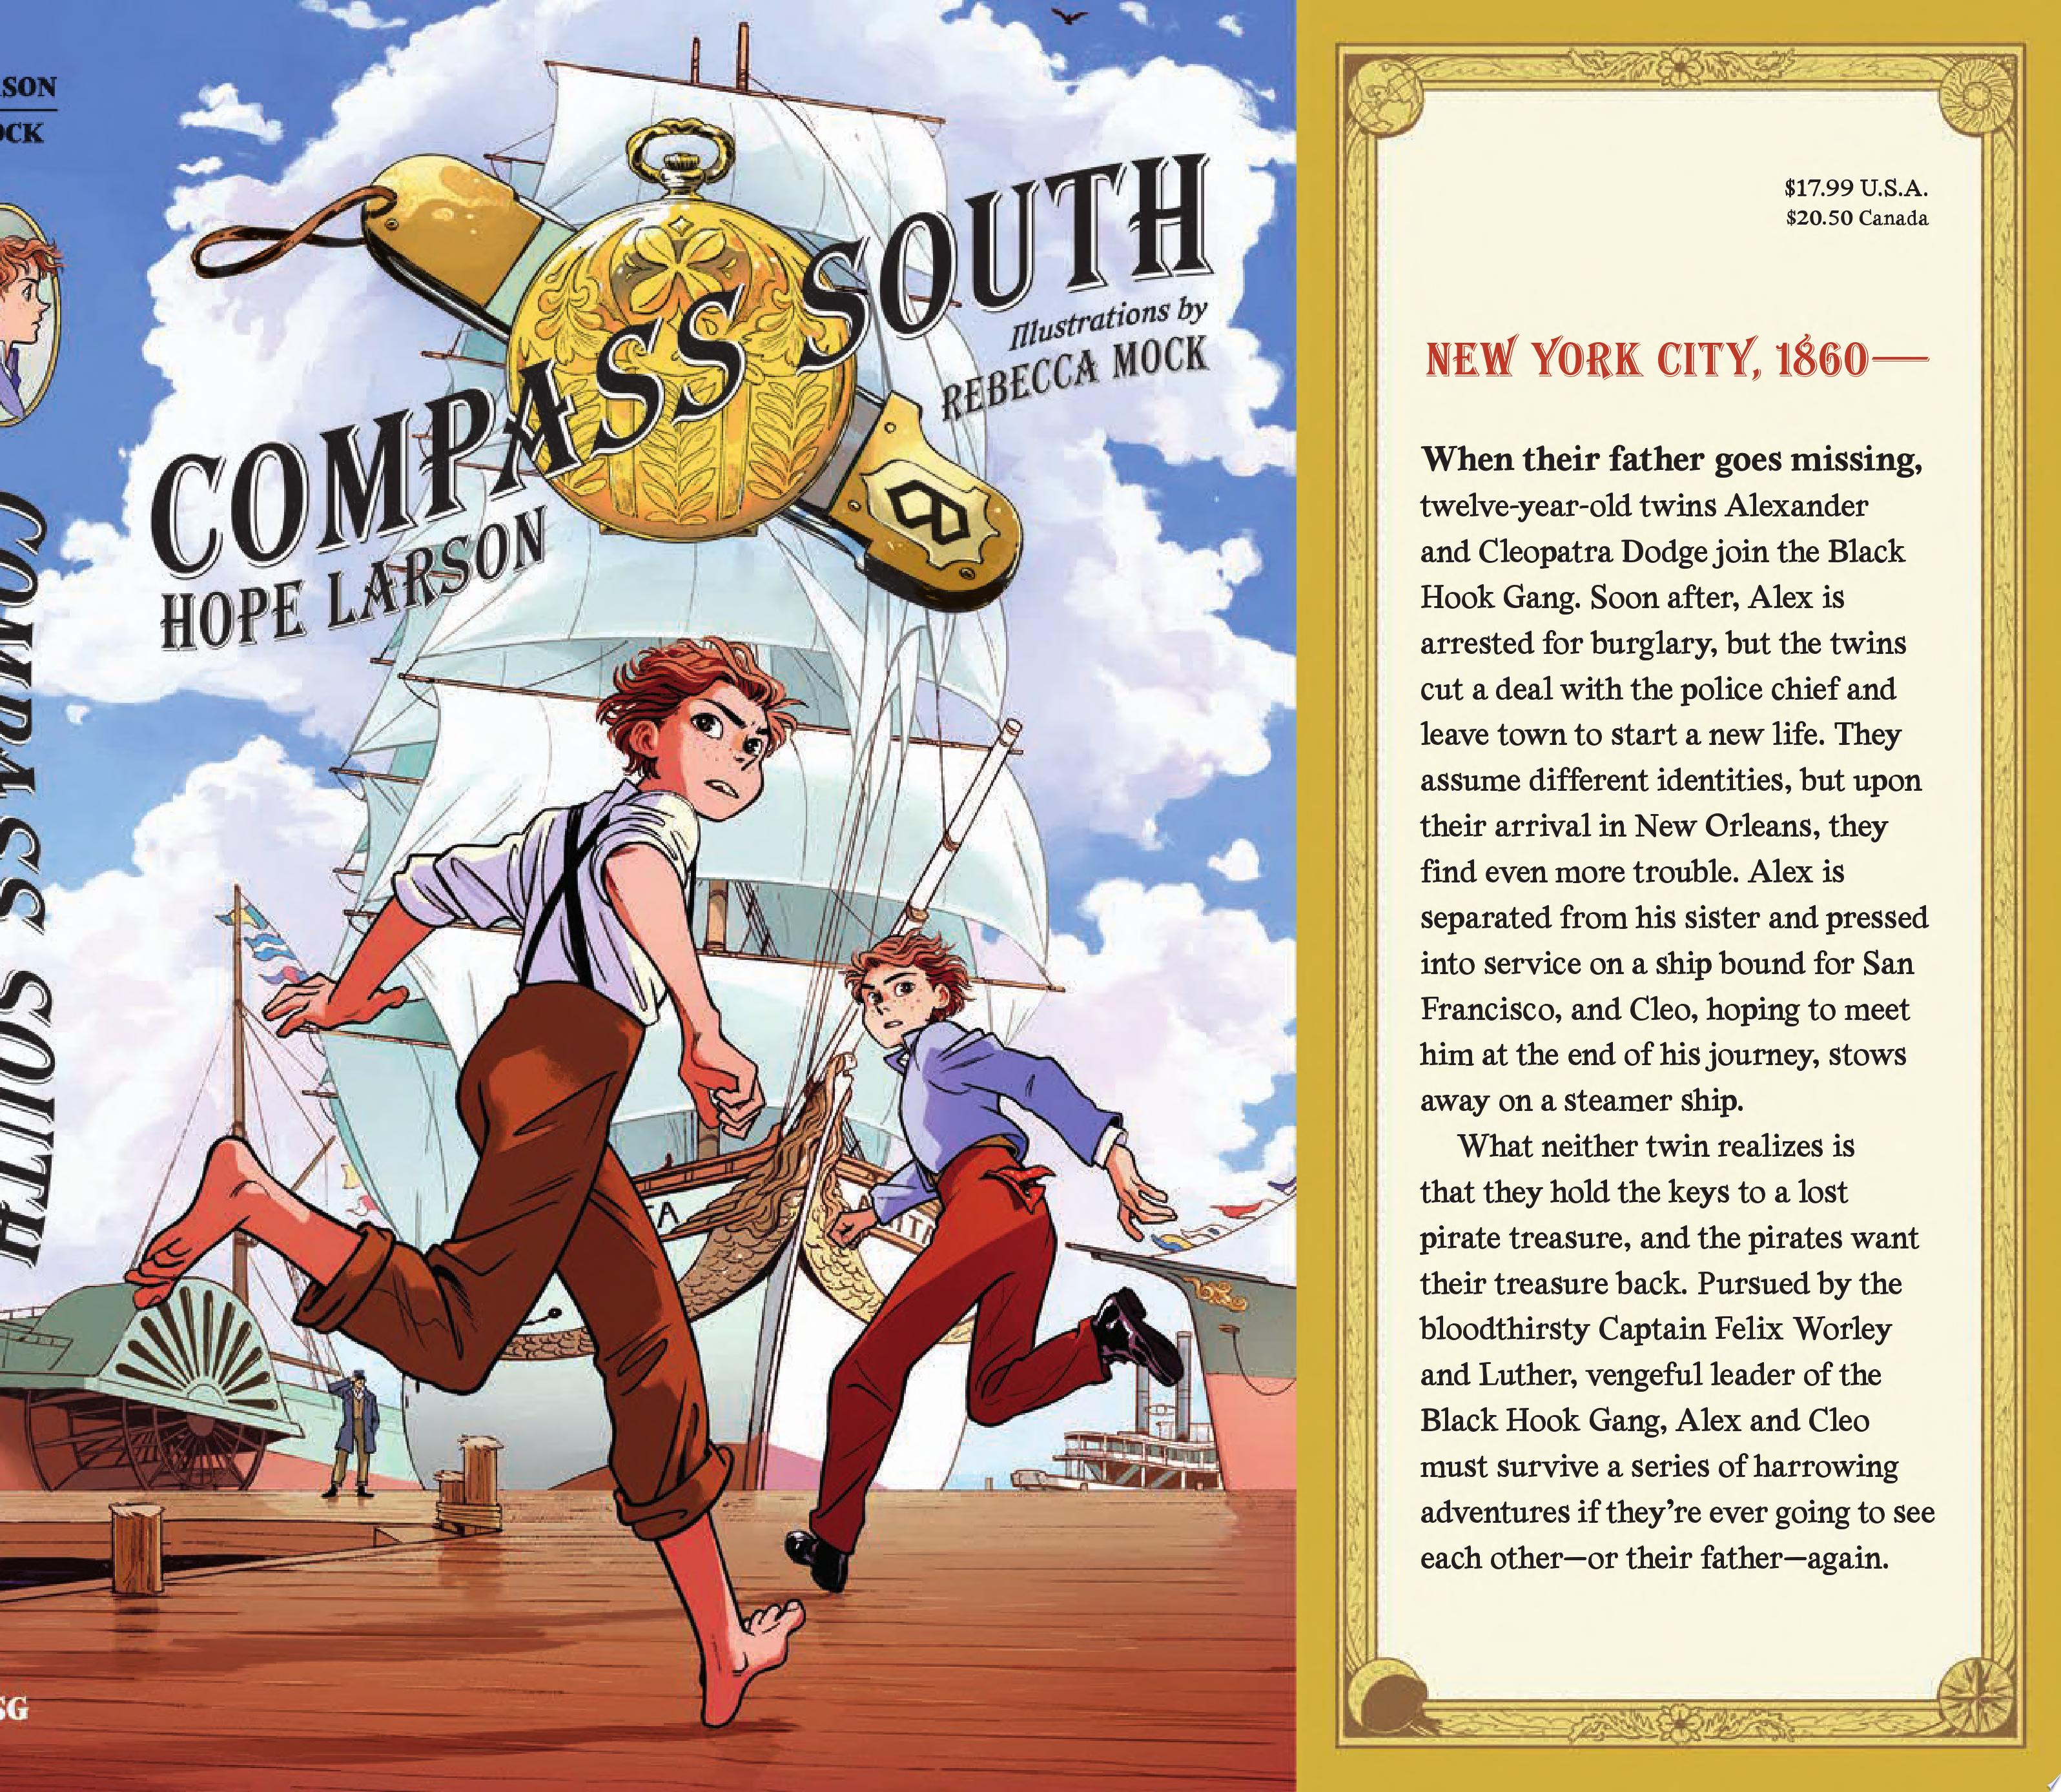 Image for "Compass South"